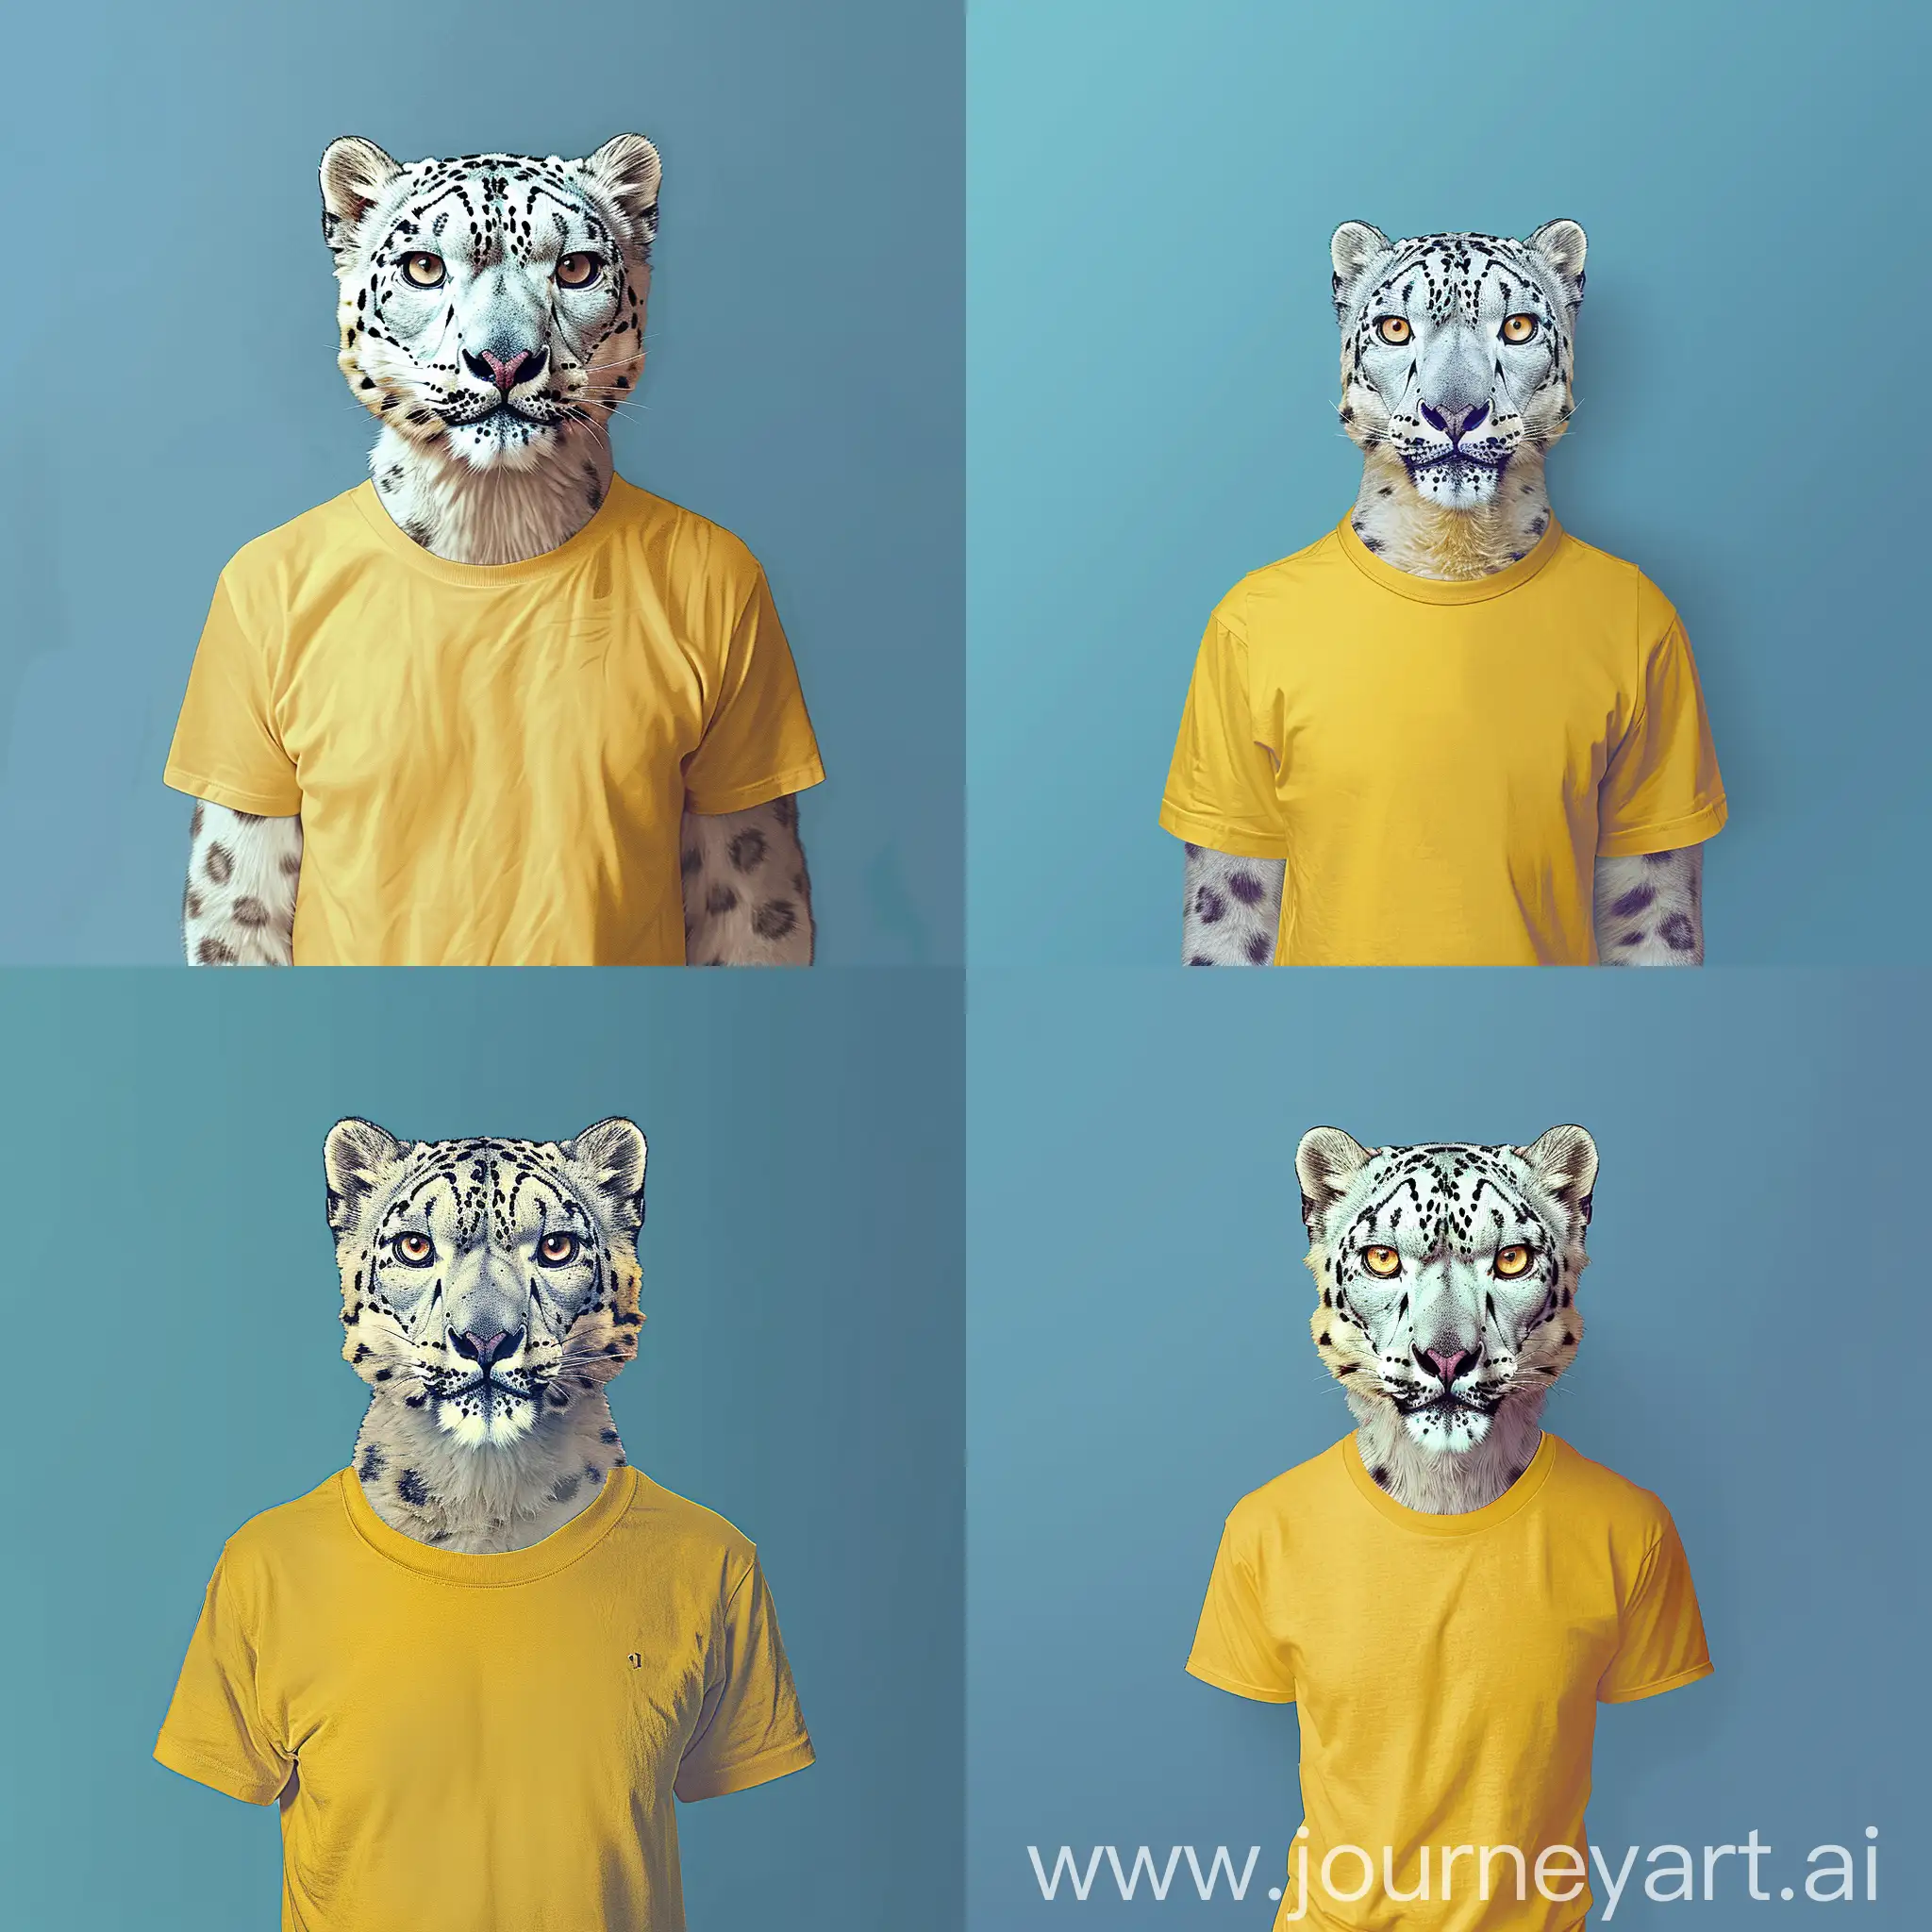 euan uglow art style of a snow leopard as a human body wearing a yellow  t-shirt , profile picture hd 8k , front view, blue background . 